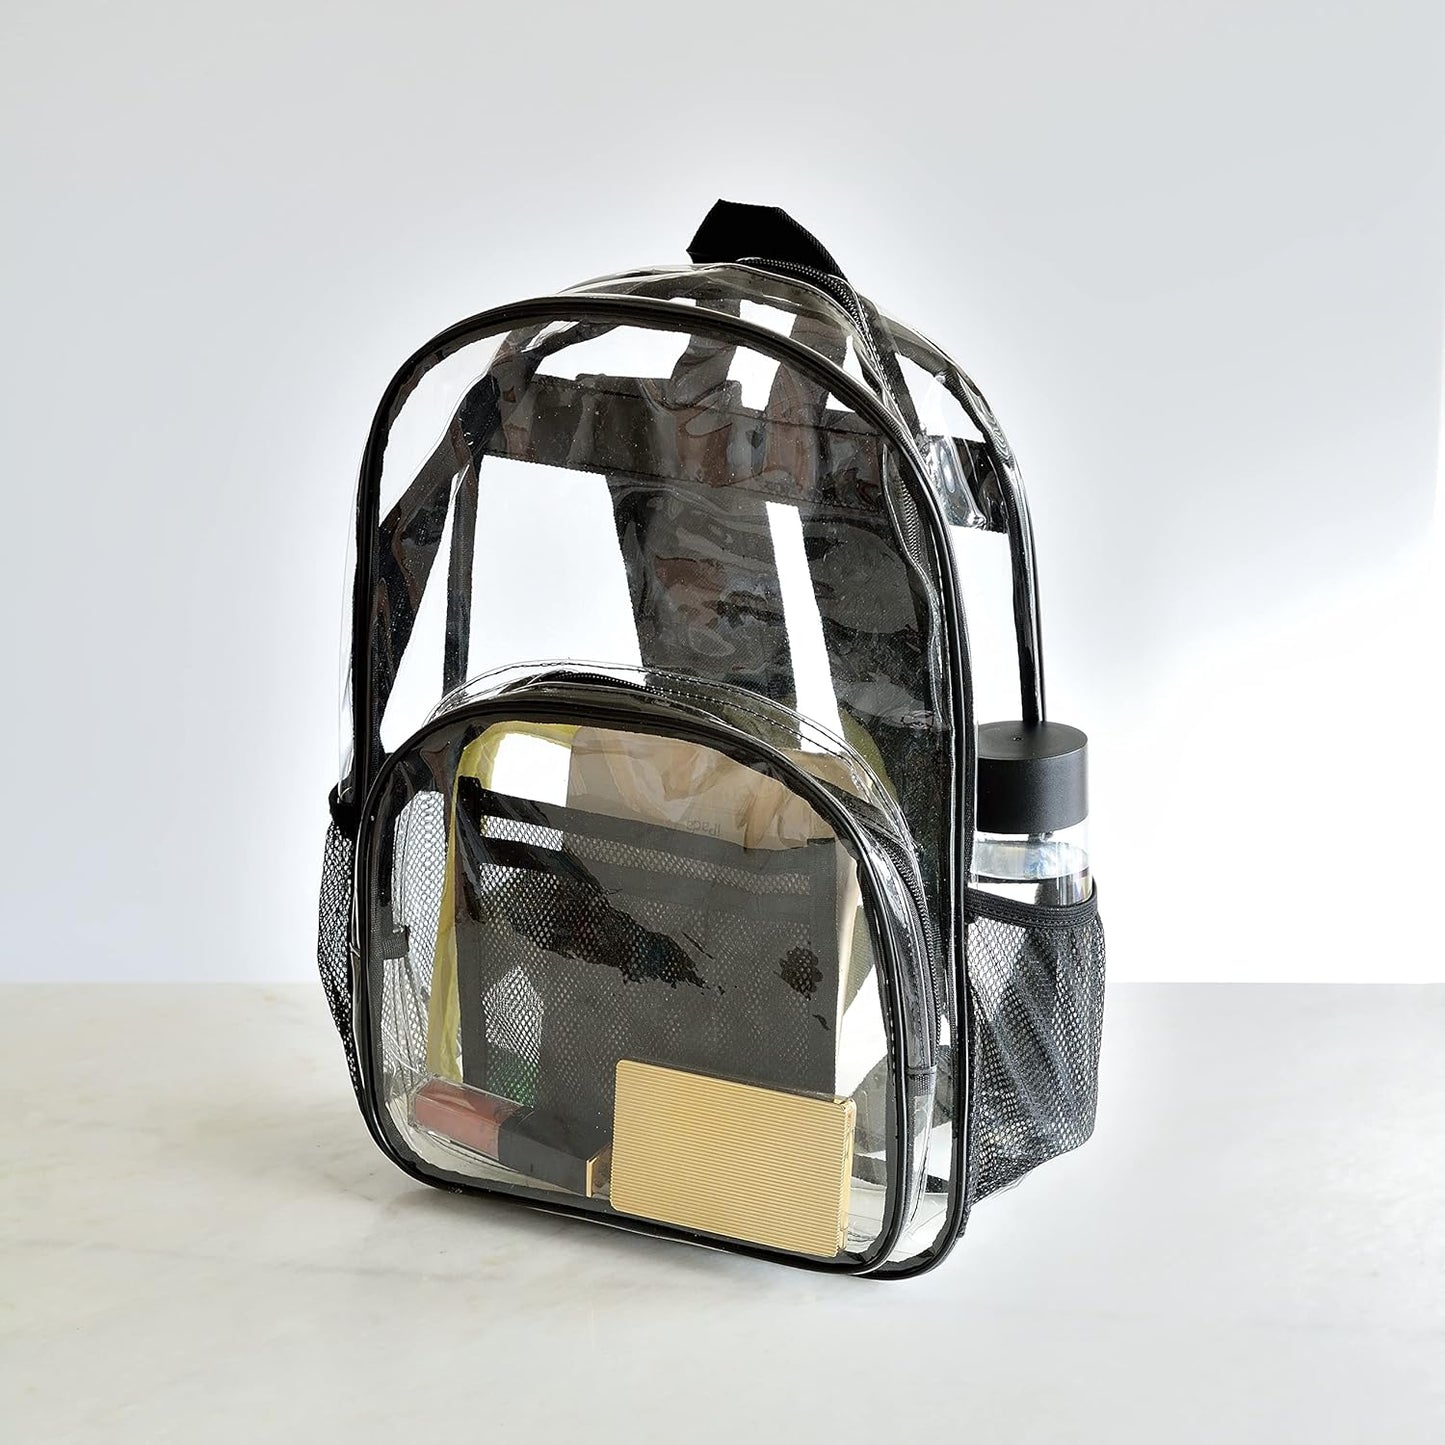 Youngever Large Clear Backpack, Stadium Approved Clear Bag